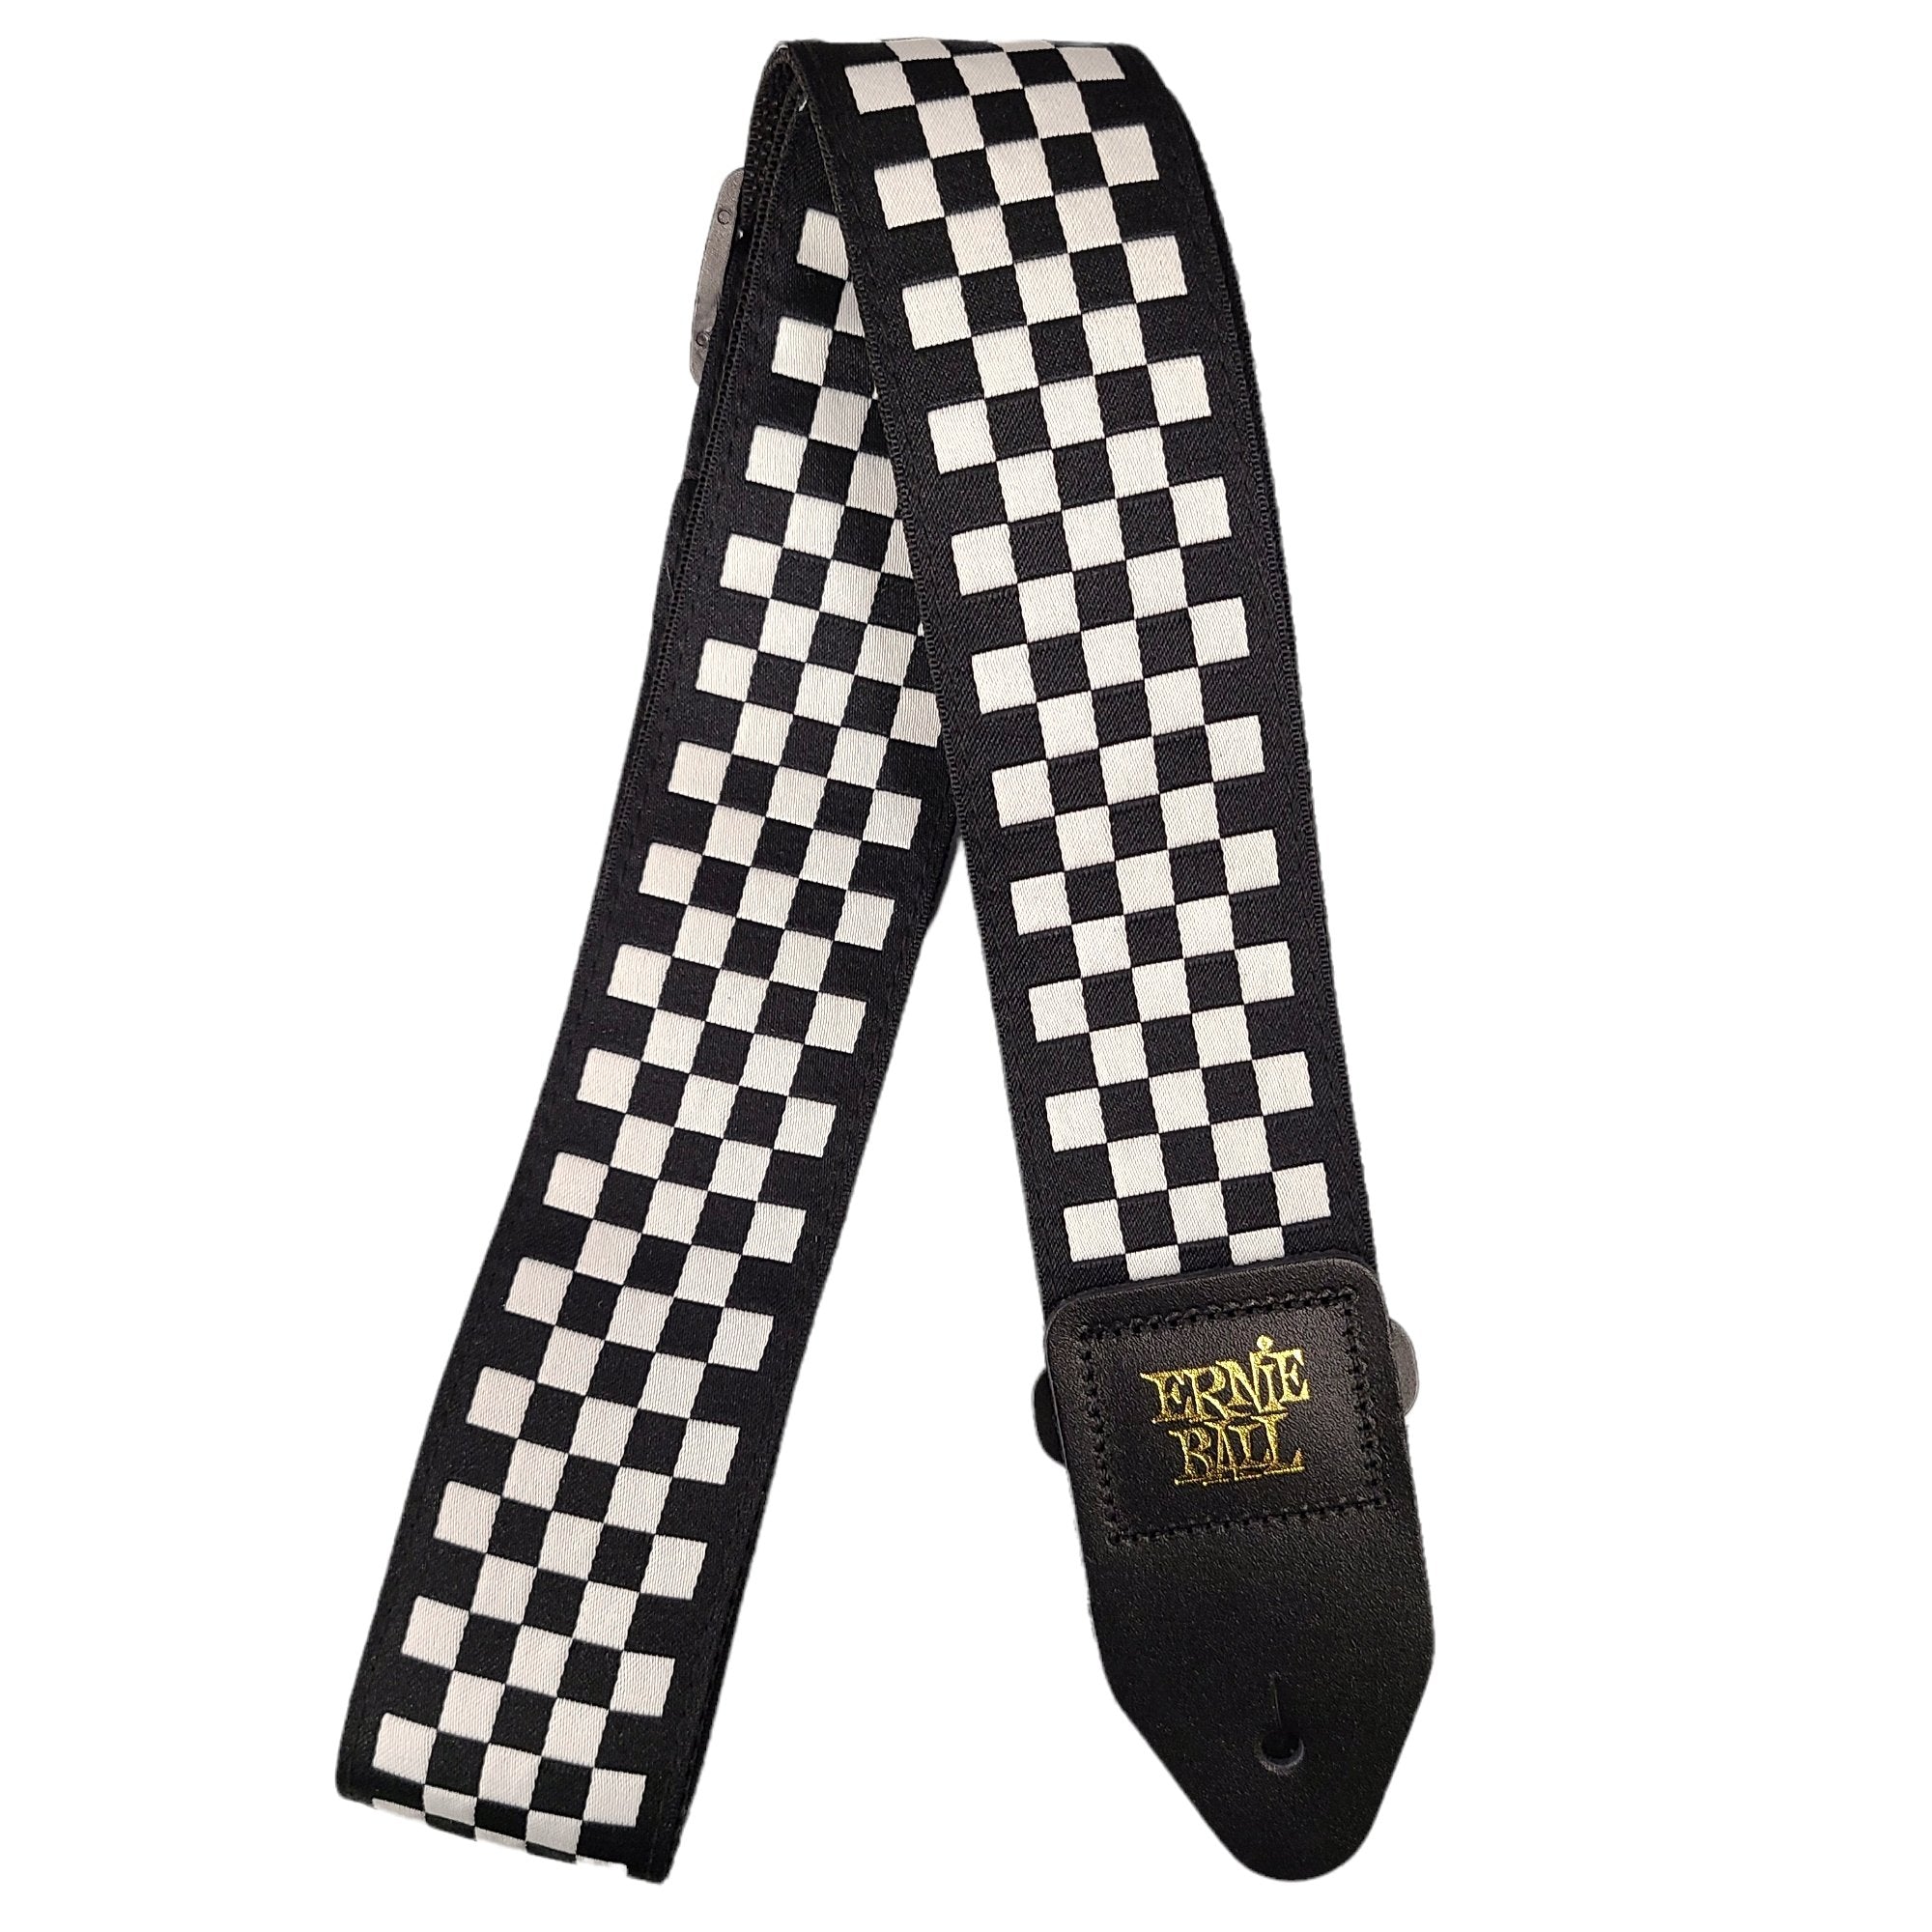 Ernie Ball Jacquard Guitar Strap 2 Inch Various Color Black and White Checkered